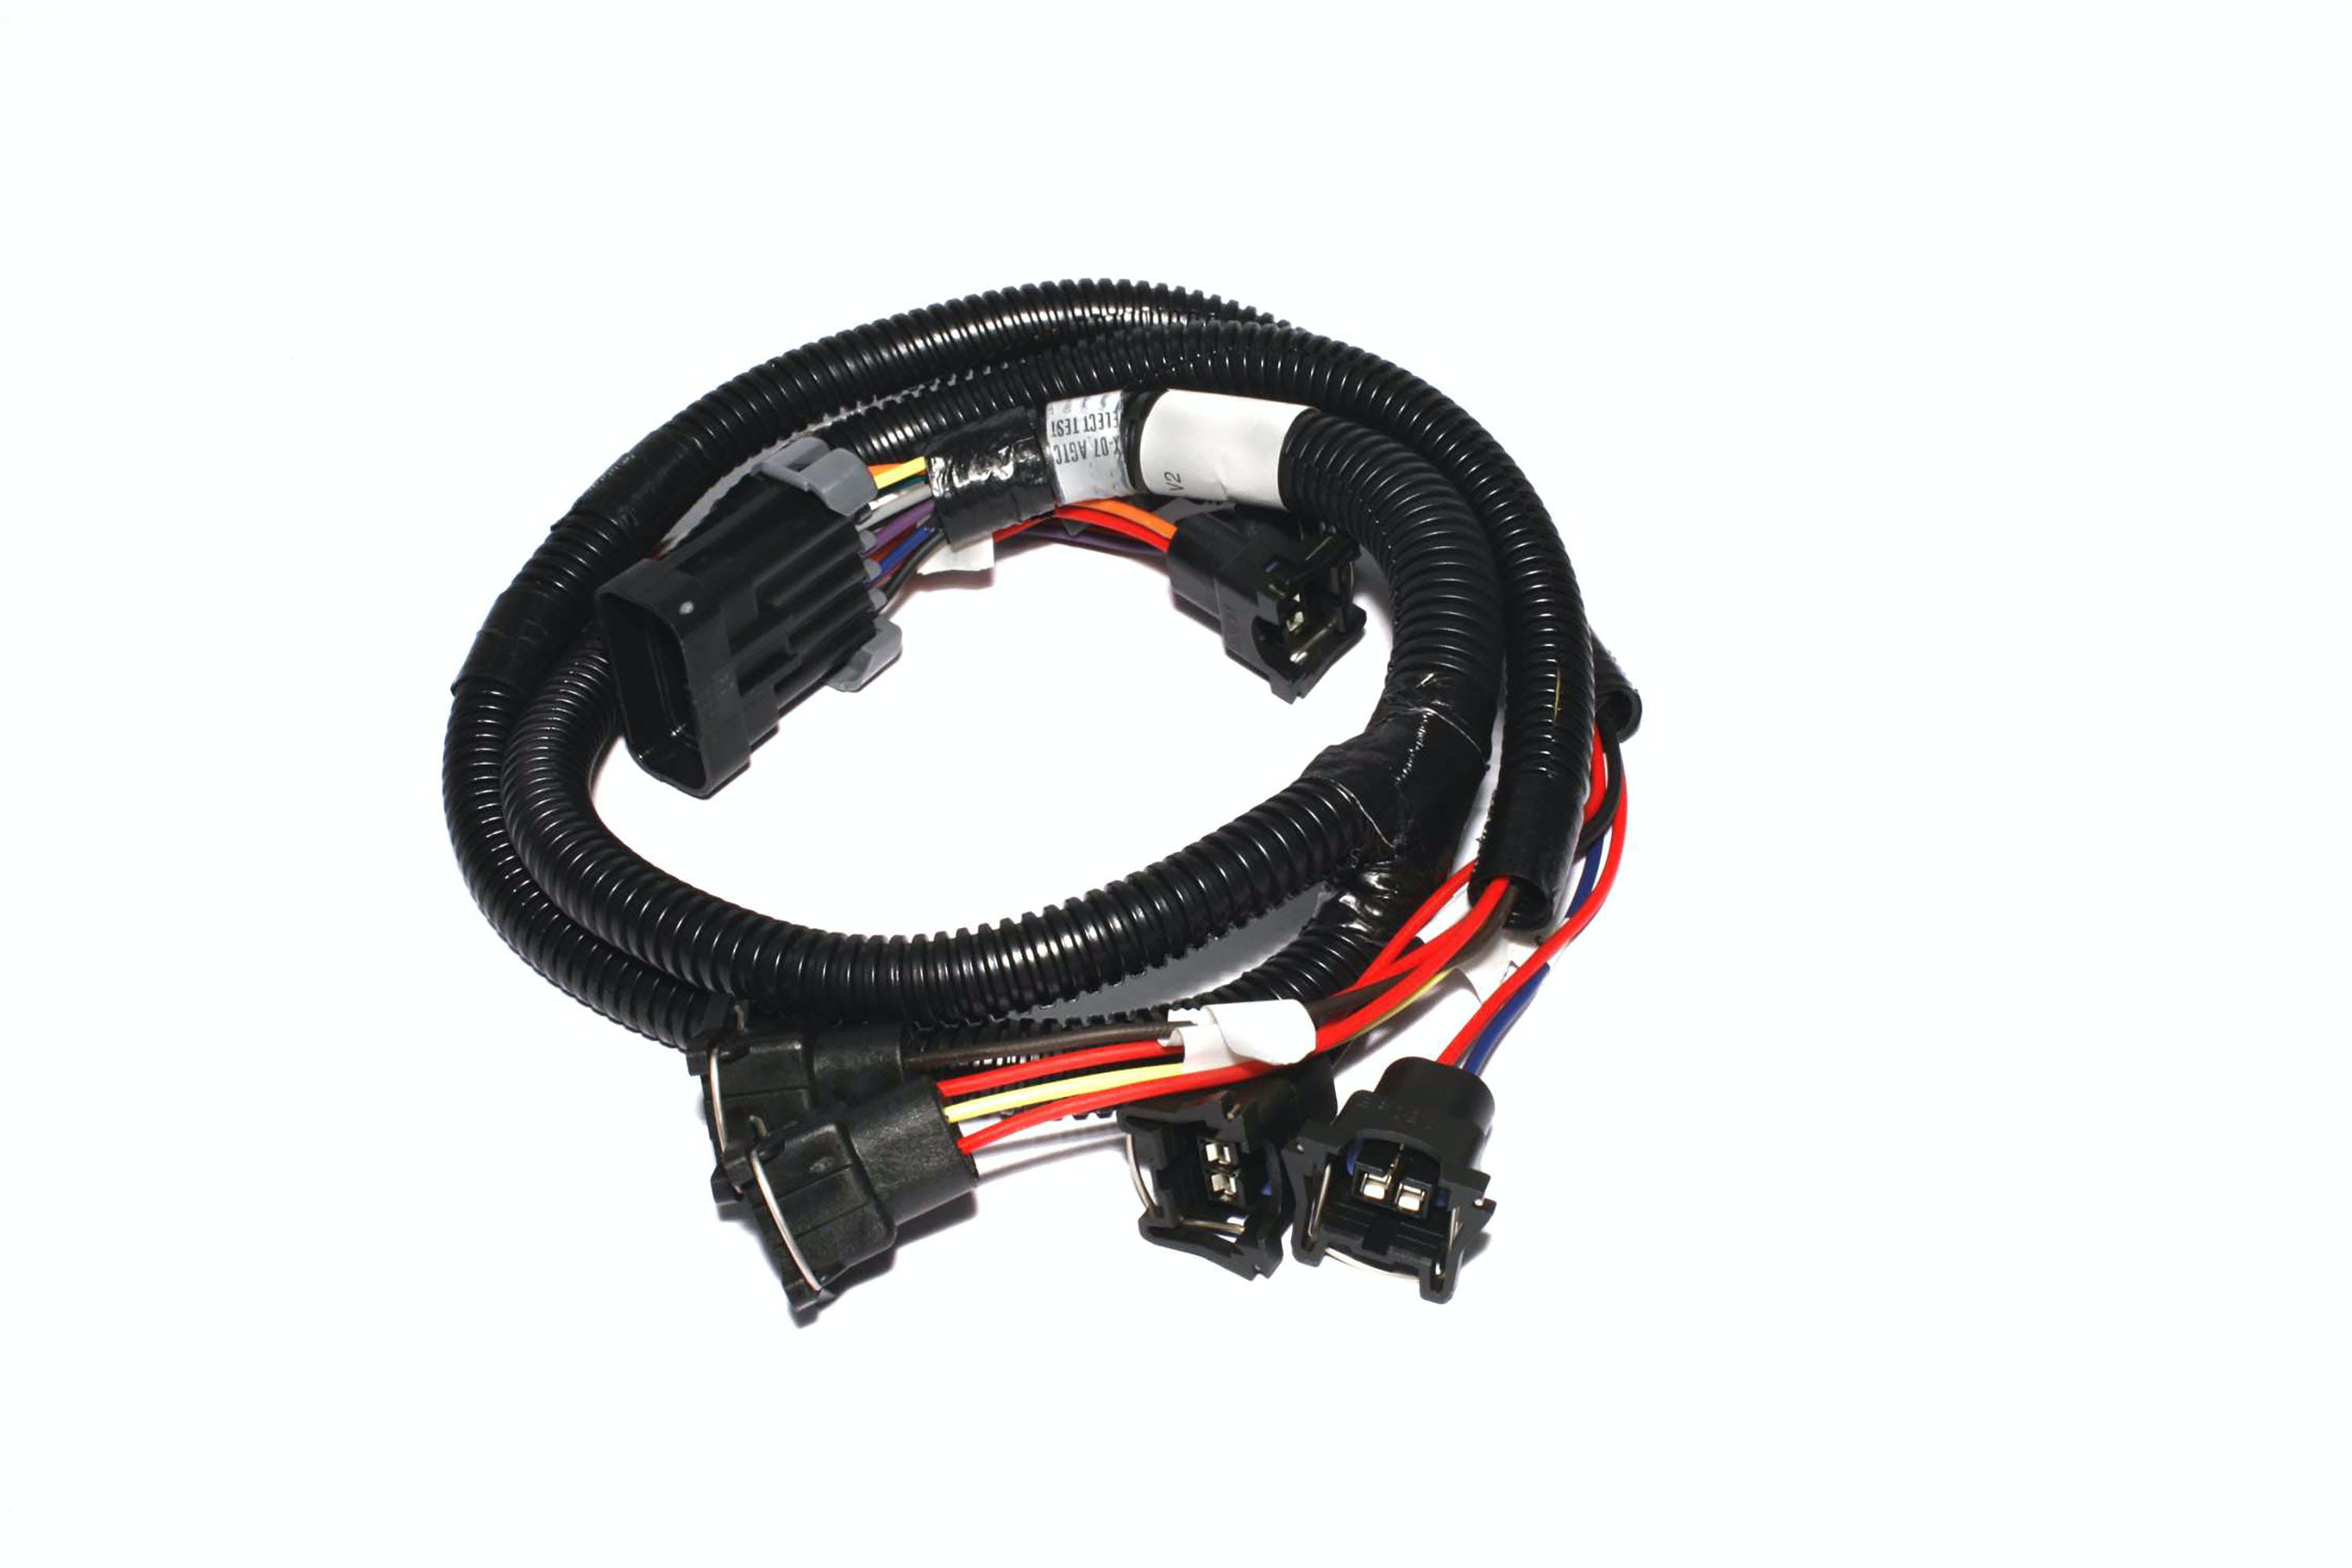 FAST - Fuel Air Spark Technology 301203 XFI Fuel Inector Harness for Ford Modular Series engines.